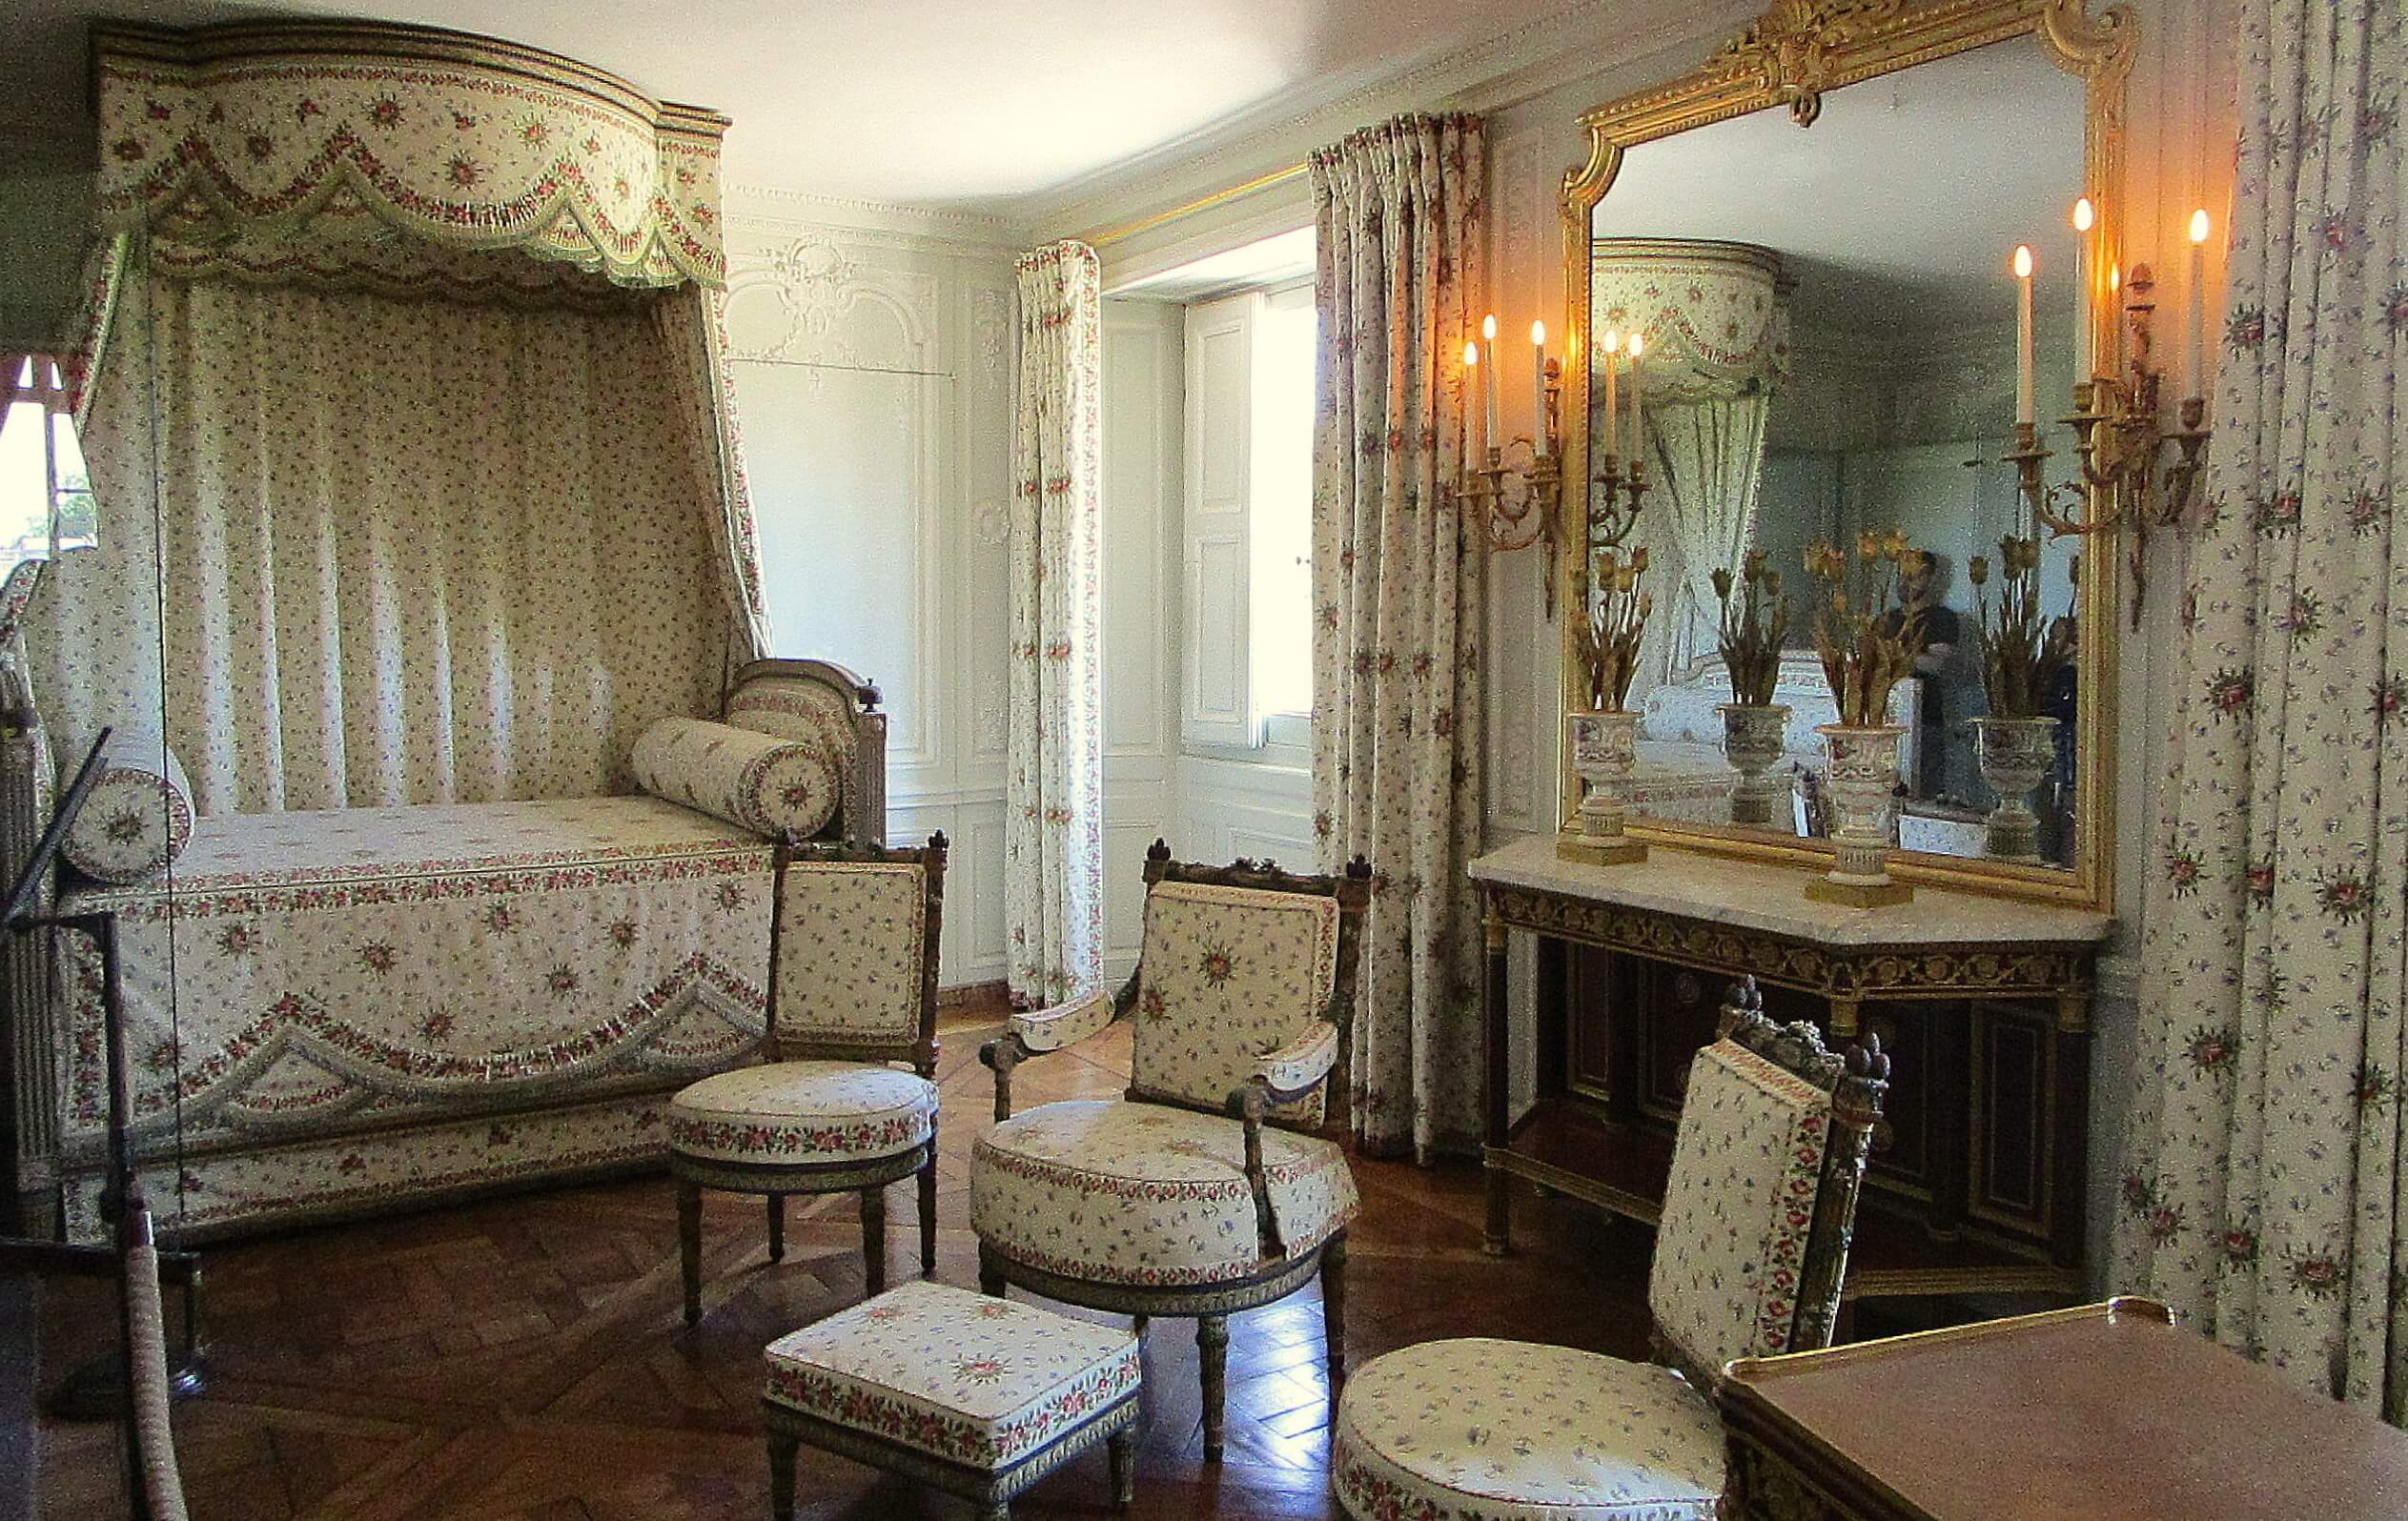 Marie Antoinette's Bedroom at the Petit Trianon